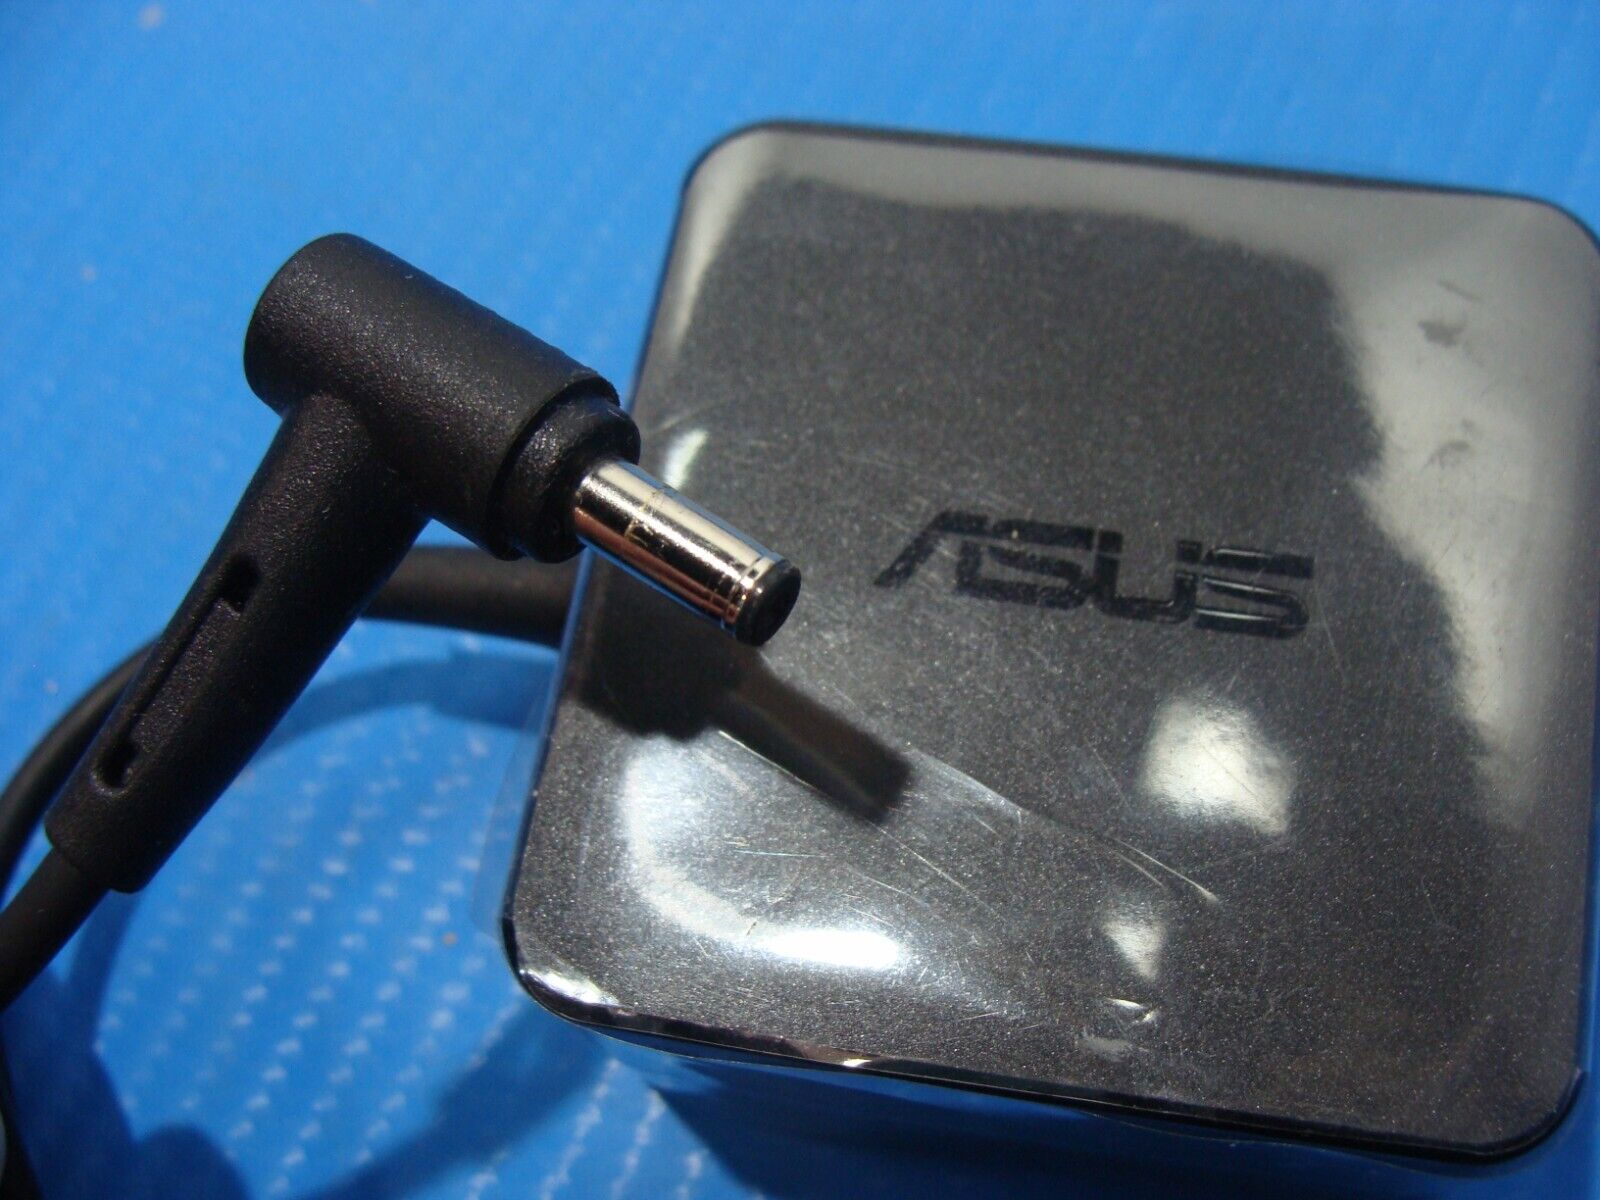 OEM Genuine ASUS 33W 19V 1.75A AC Adapter Charger for Asus Vivobook X200M X200MA